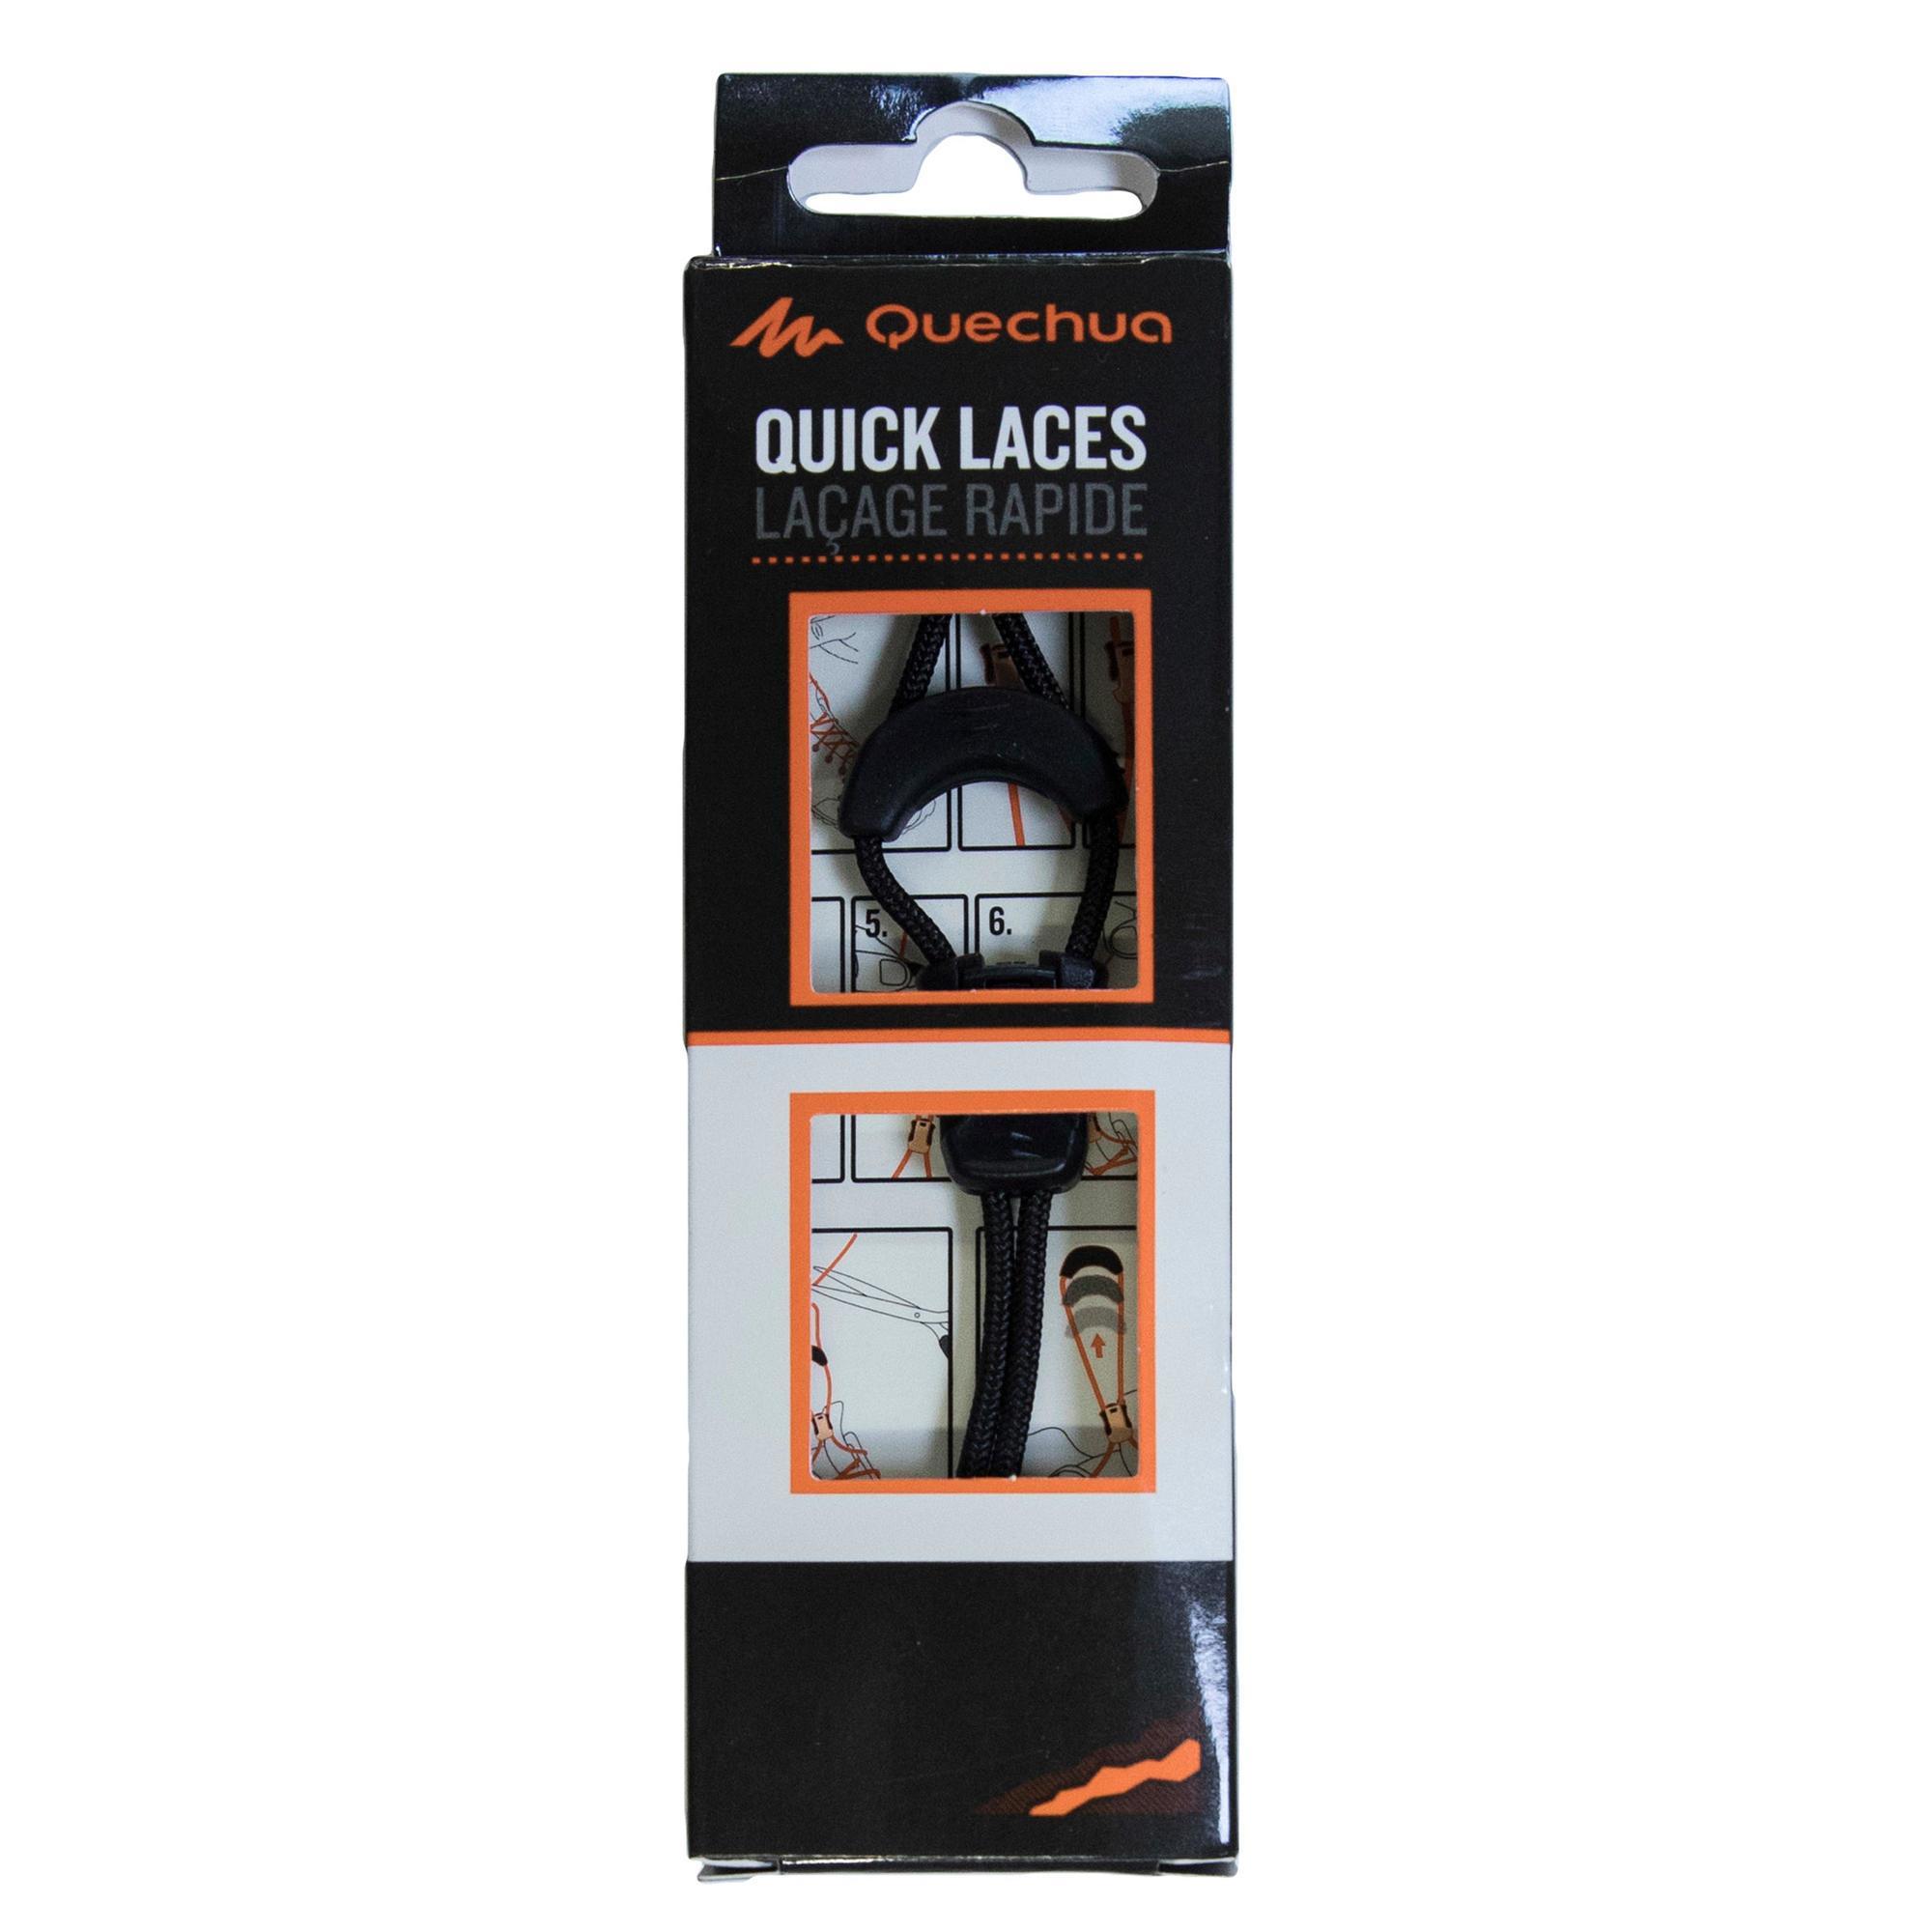 Quick laces For Hiking Boots QUECHUA 